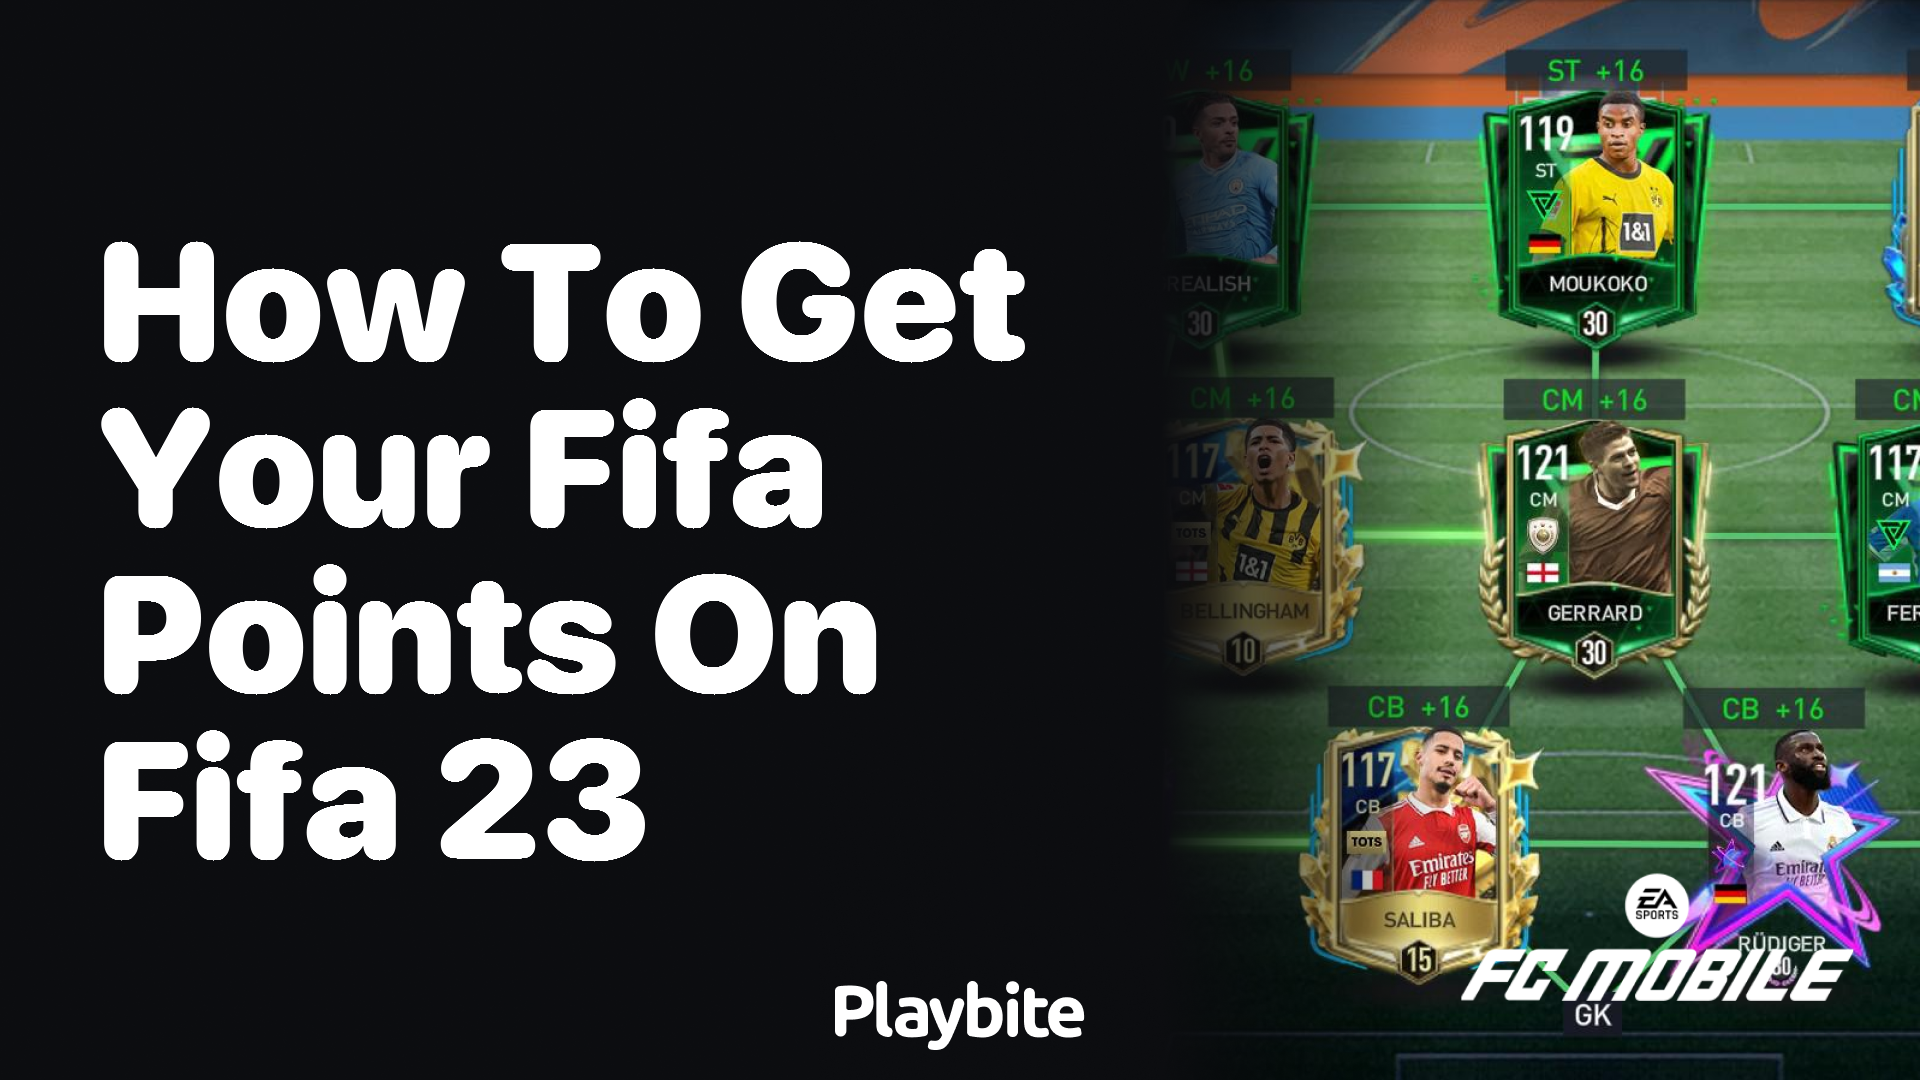 How to Get Your FIFA Points on FIFA 23